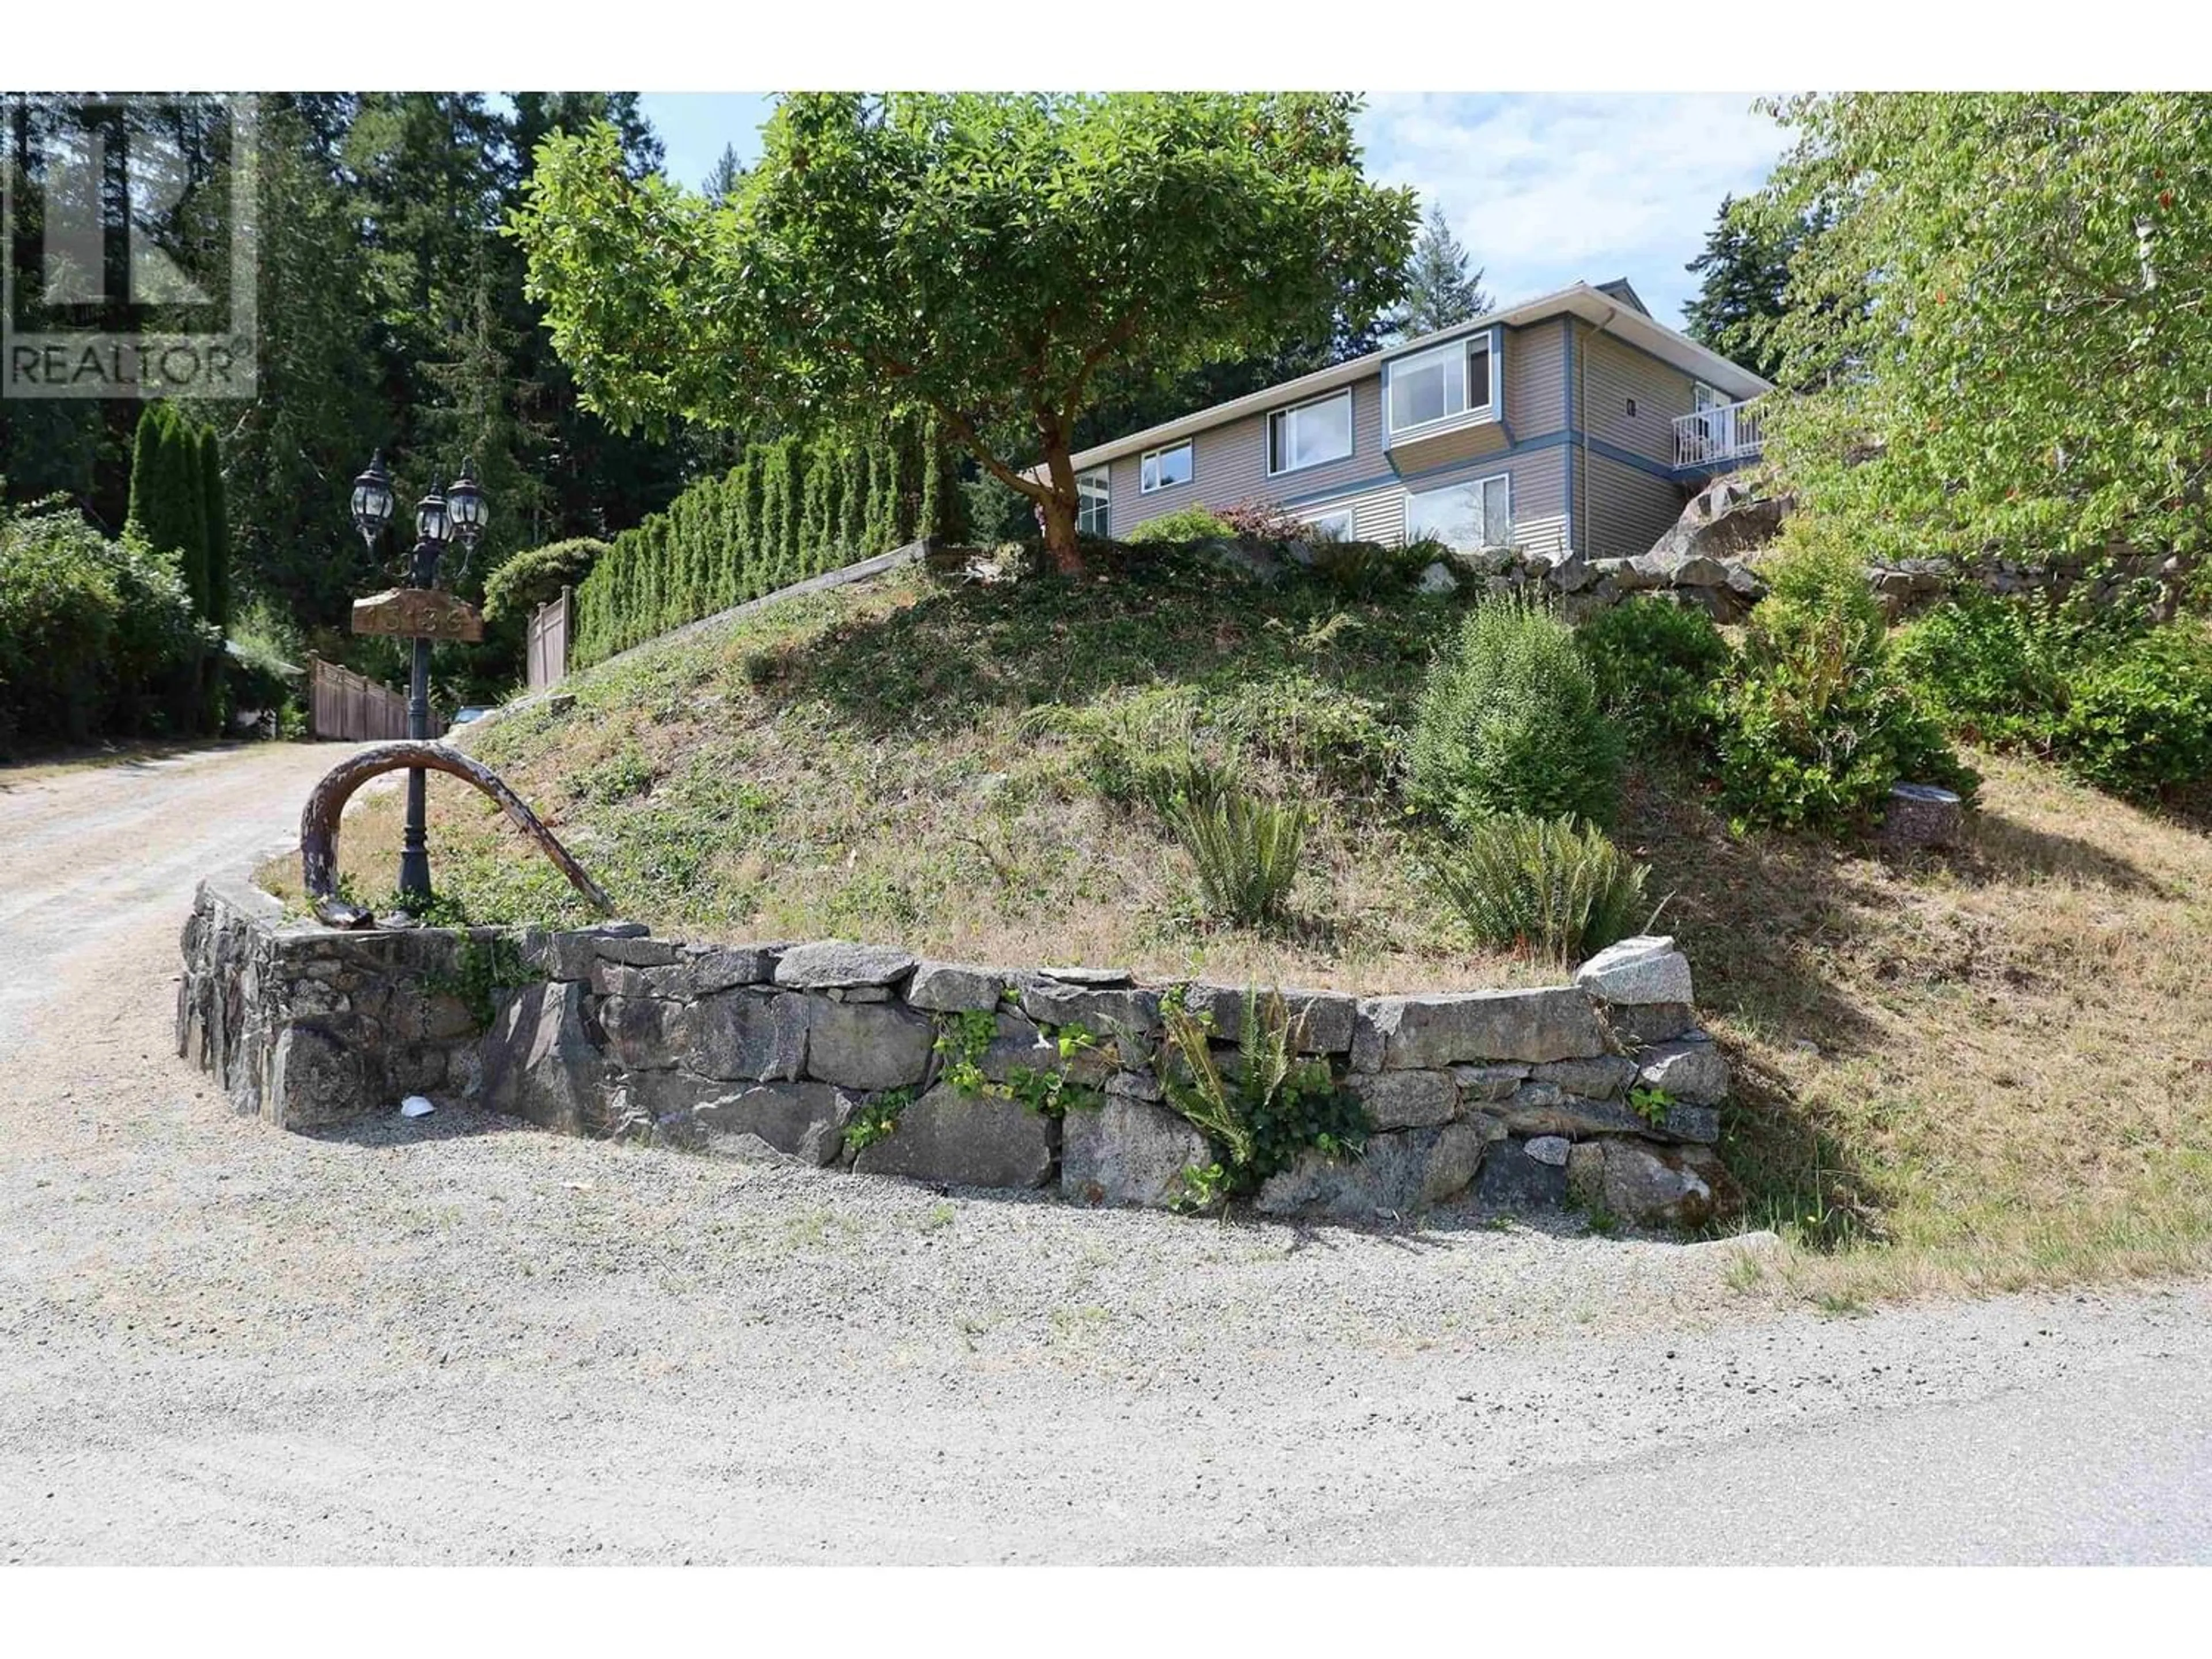 Street view for 13136 NARROWS ROAD, Madeira Park British Columbia V0N2H1